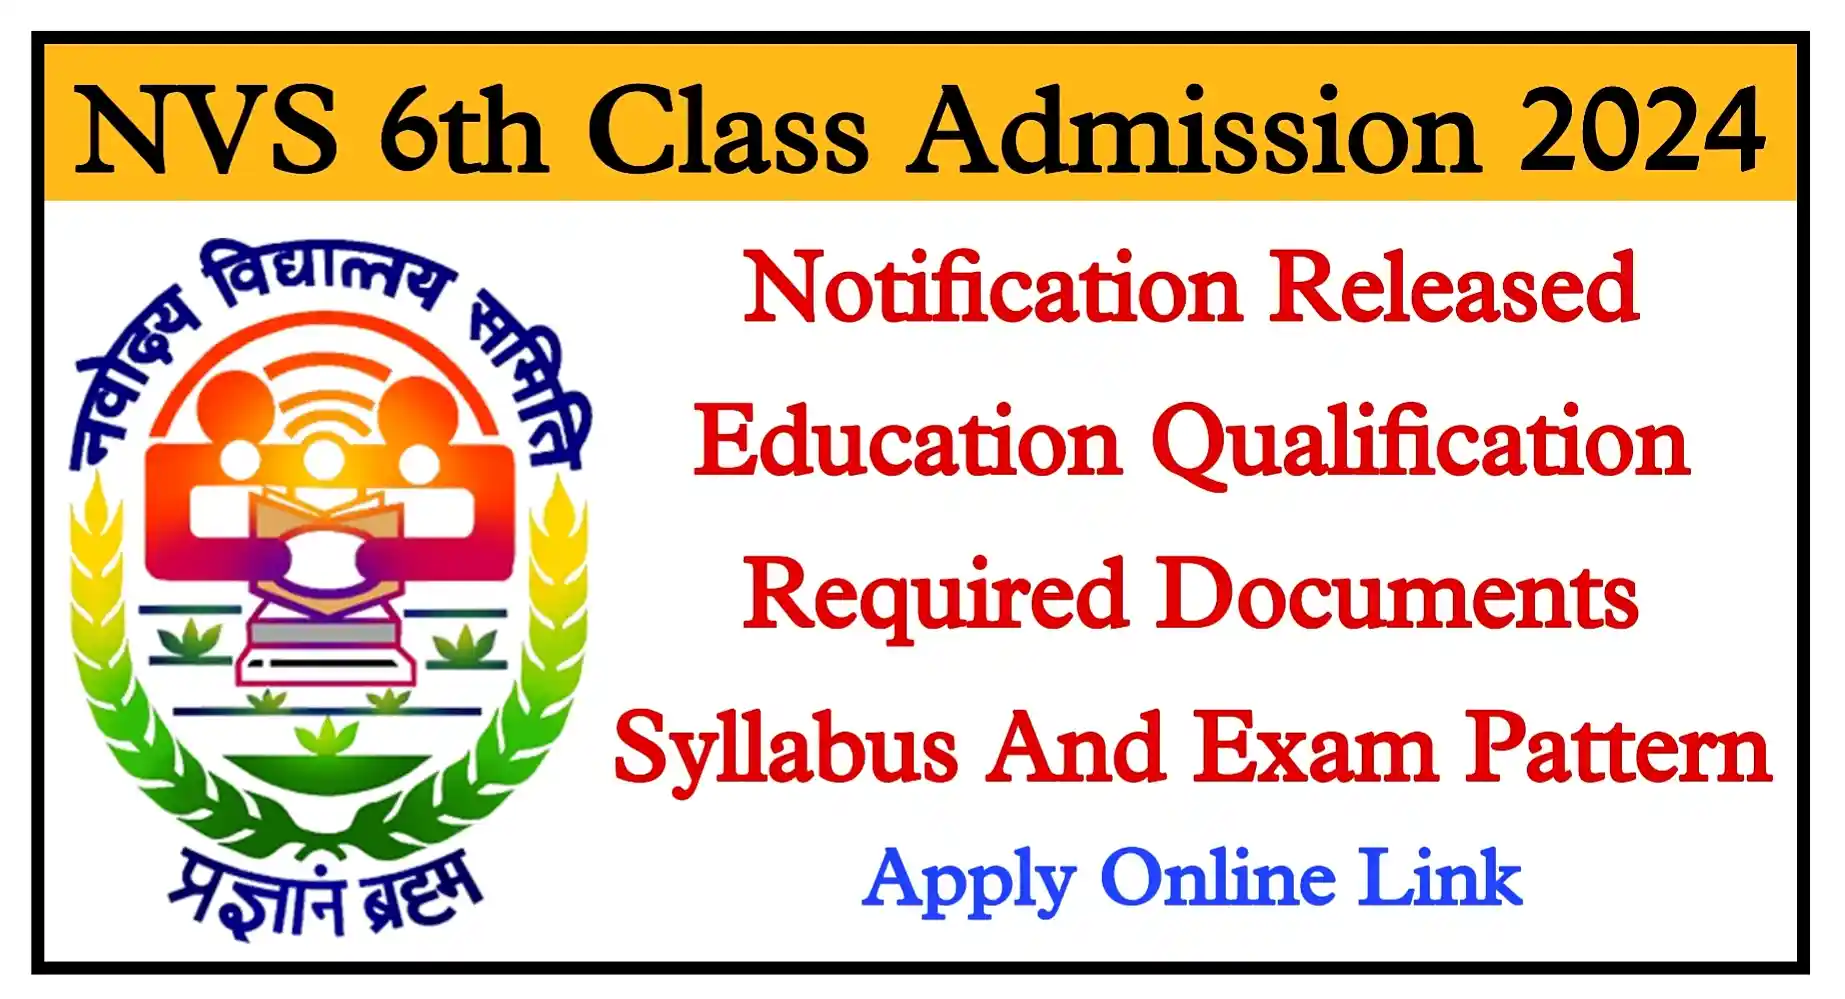 NVS 6th Class Admission 2024 Notification, Apply Online, Exam Date, Syllabus Check All Details